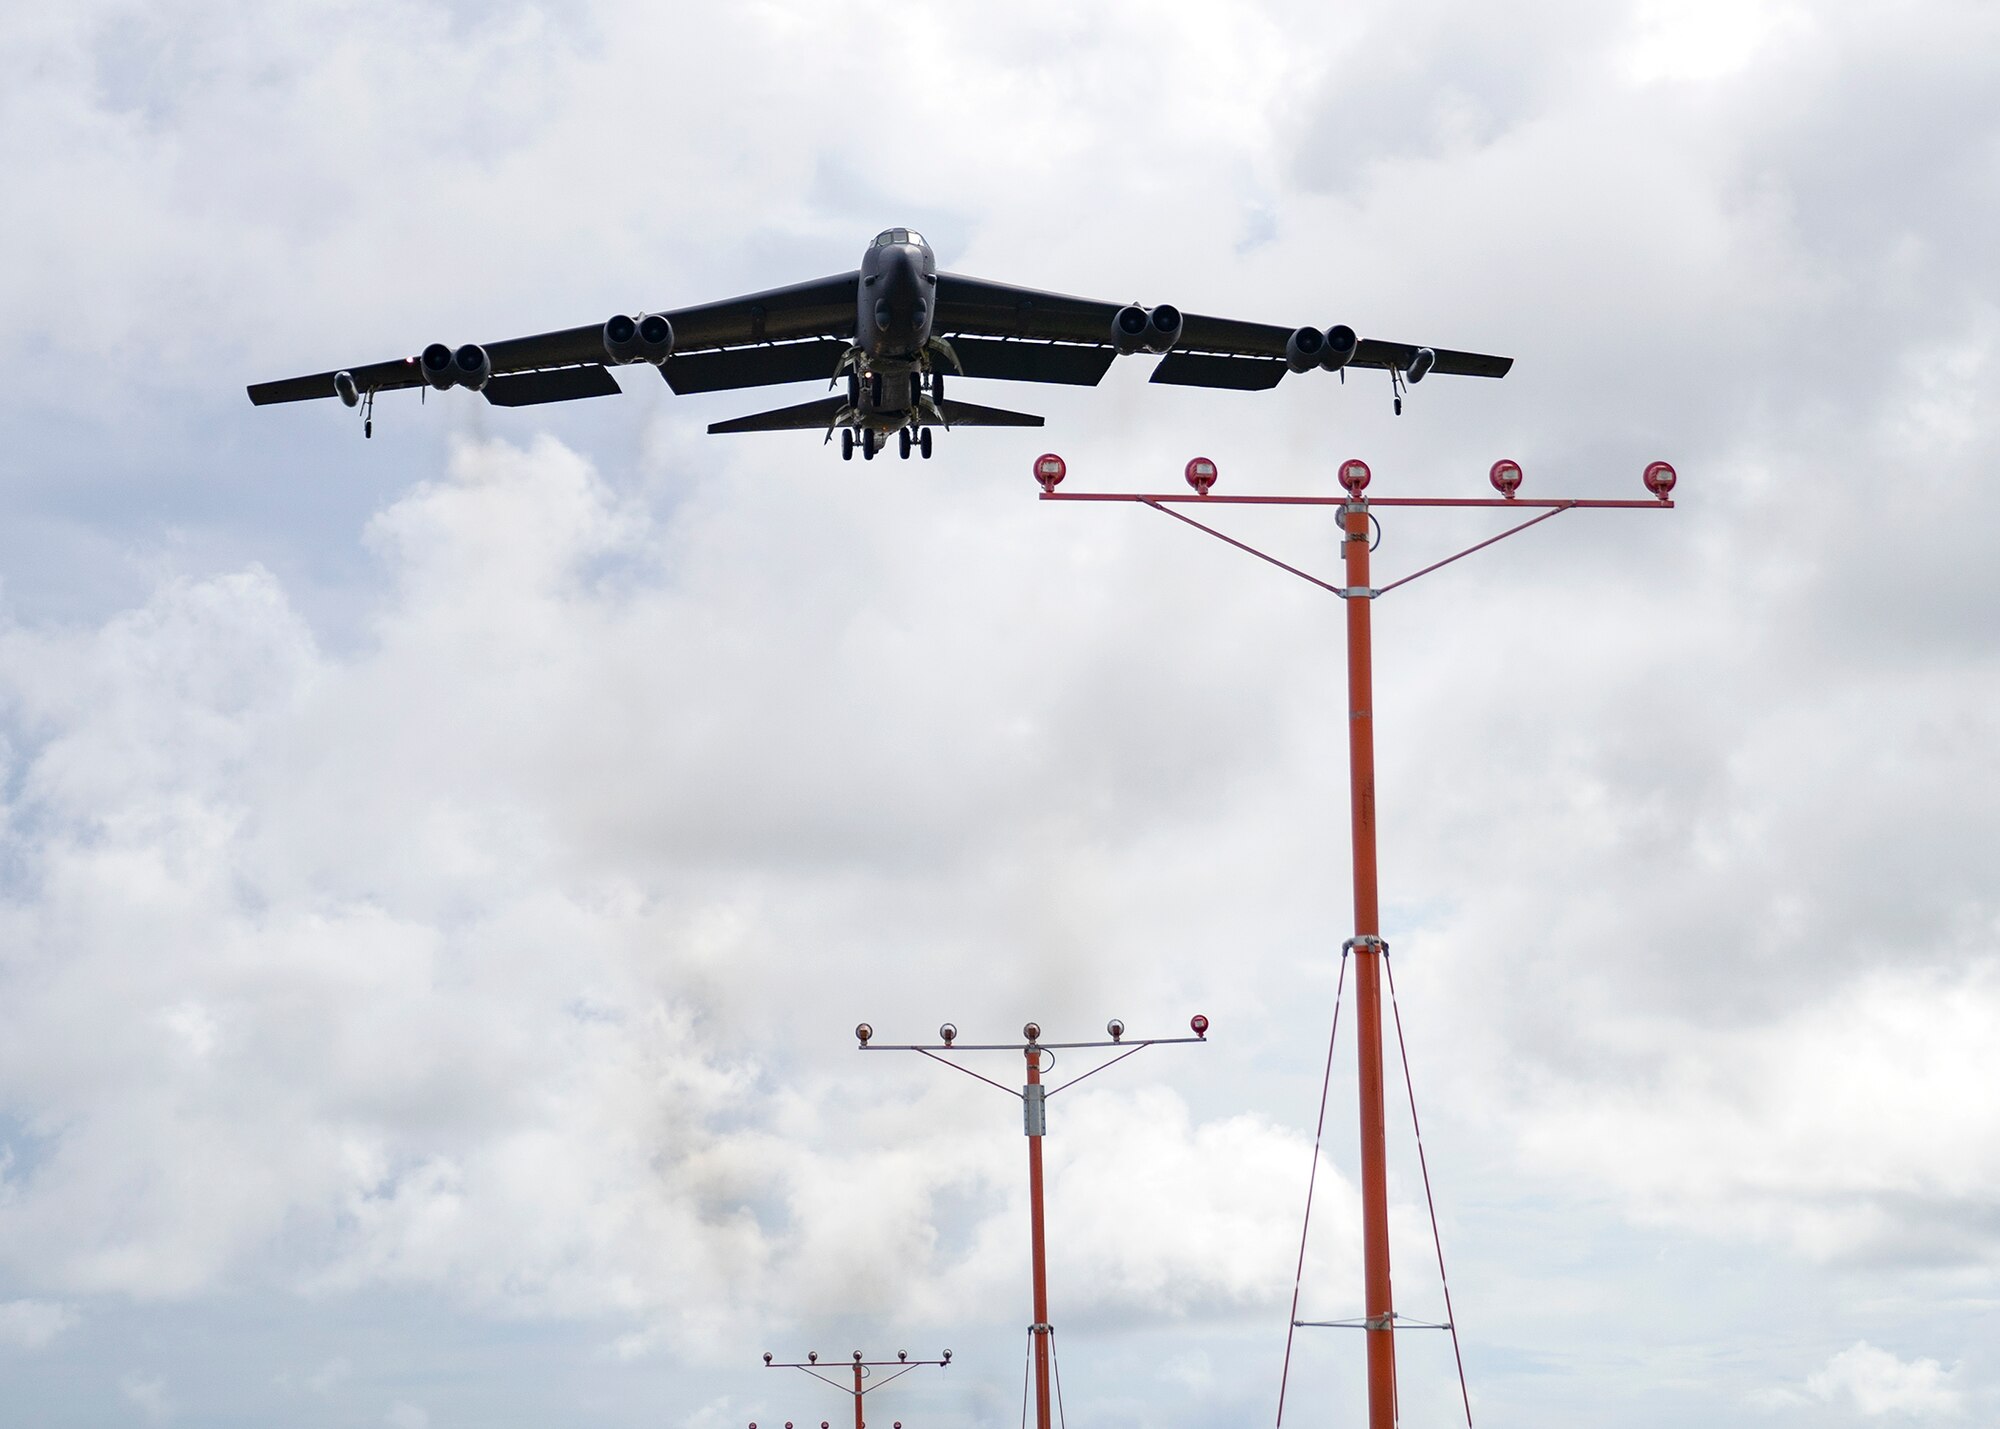 U.S. Air Force B-52H Stratofortress from the 5th Bomb Wing, Minot Air Force Base North Dakota, prepares to land at Andersen Air Force Base, Guam, for a Bomber Task Force deployment, July 15, 2021. Bomber Task Force missions demonstrate the strategic credibility and tactical flexibility of U.S. forces in today’s security environment across the globe. (U.S. Air Force photo by Staff Sgt. Kevin Iinuma)